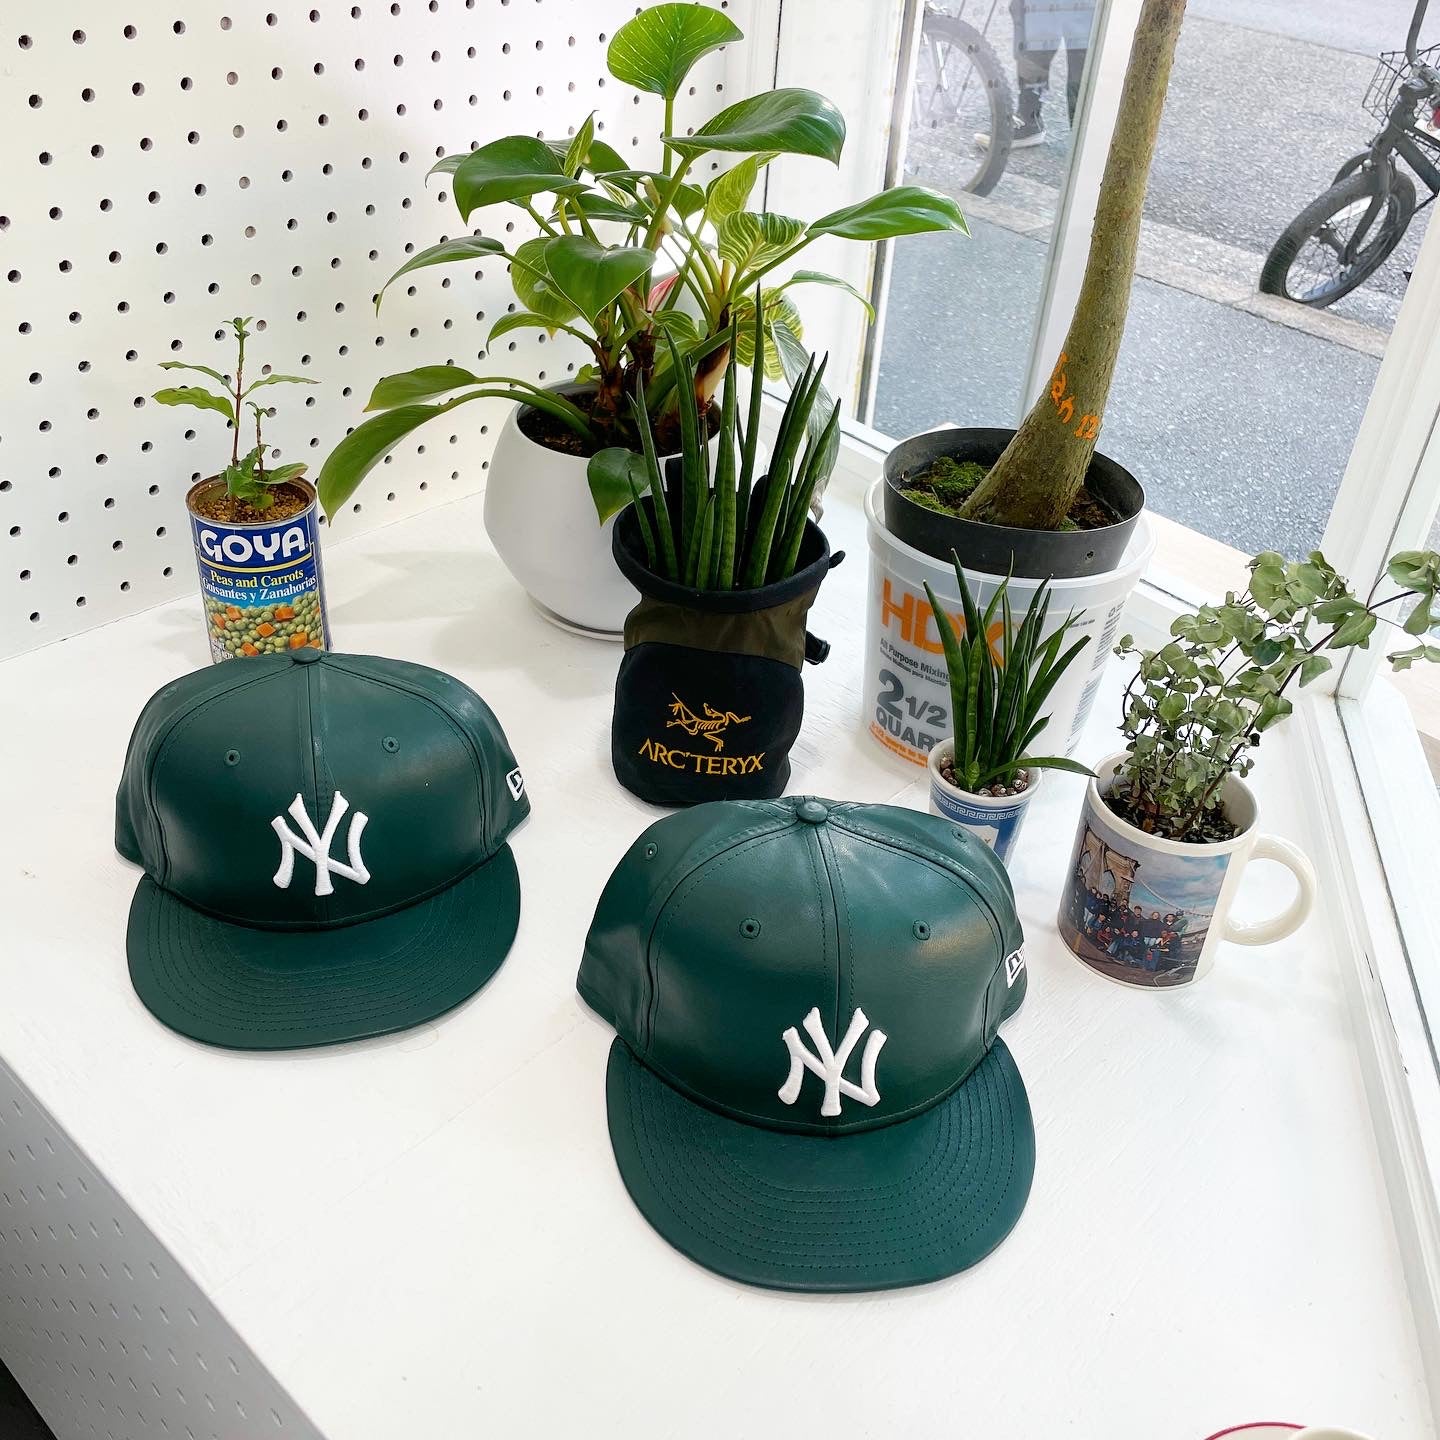 New York Yankees New Era 59FIFTY Fitted Cap "Dark Green Leather"